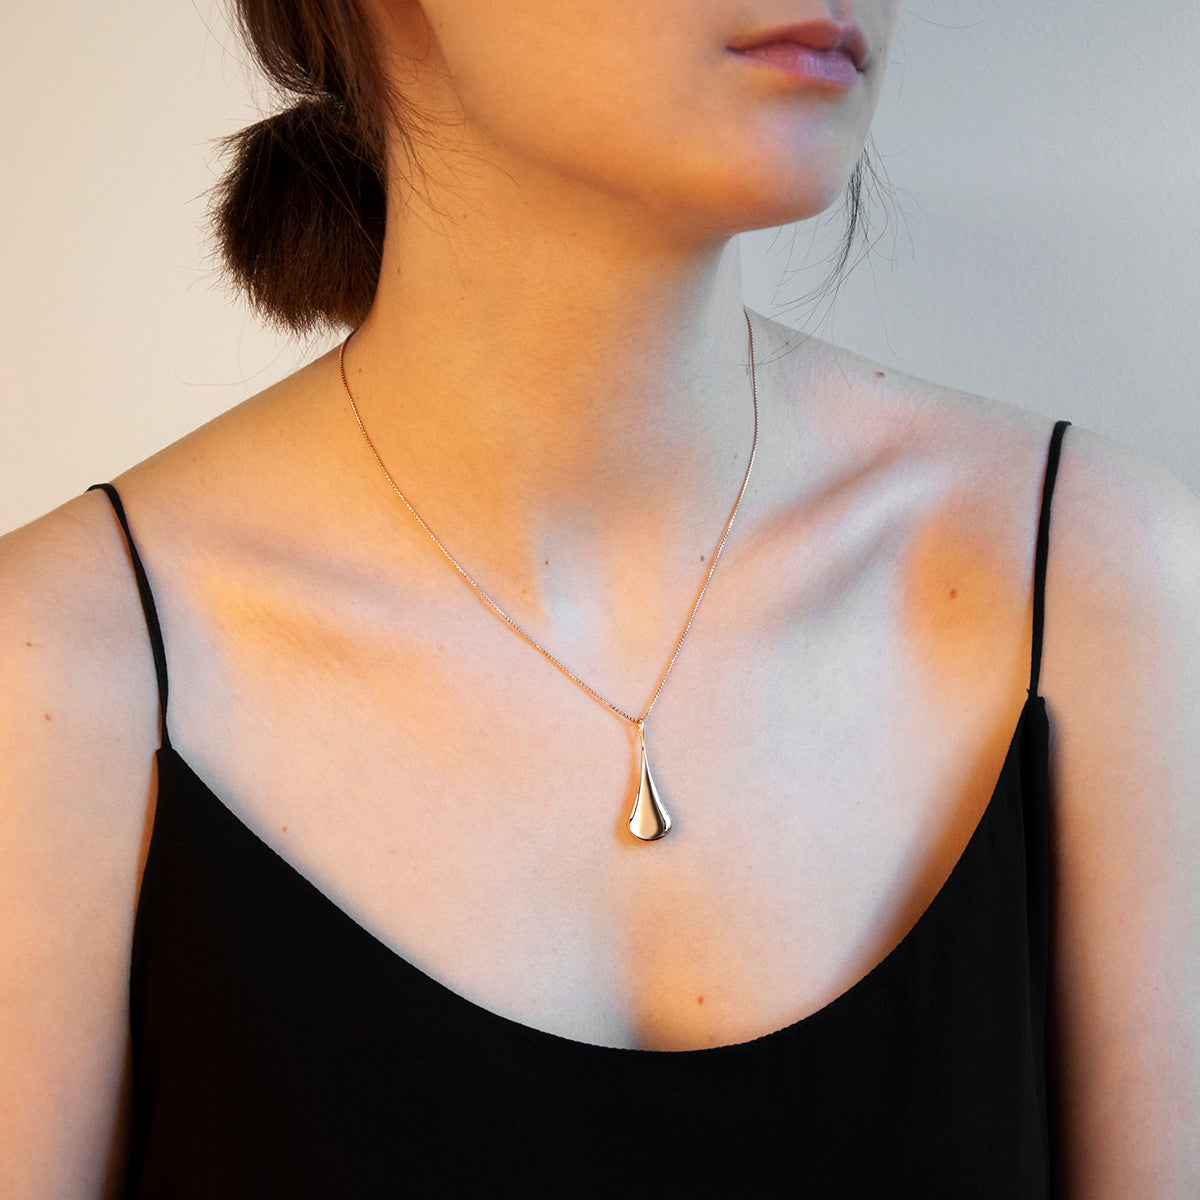 Weeping widow necklace rose gold